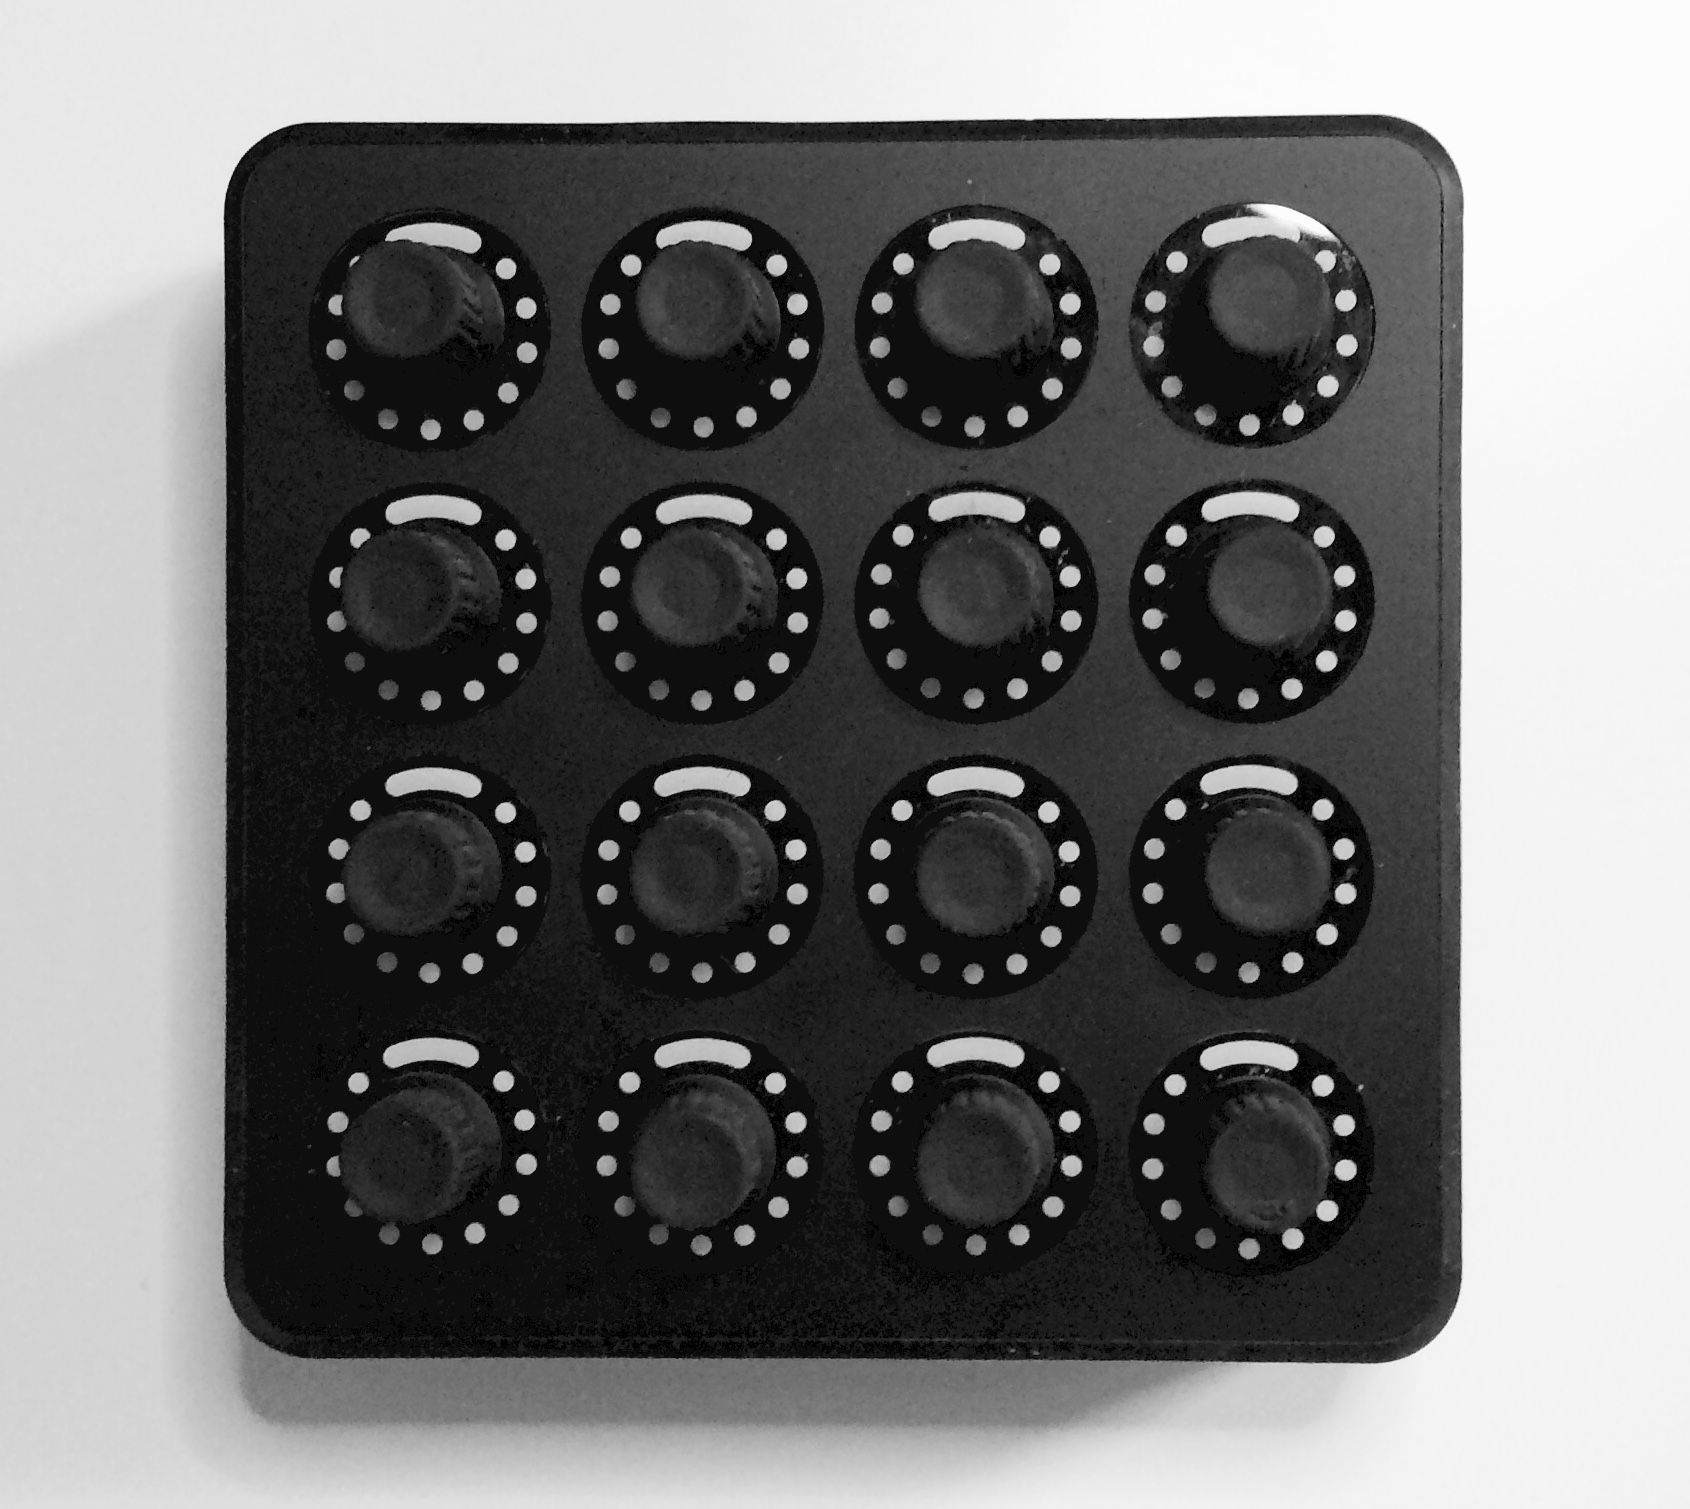 Midi fighter Twister product image